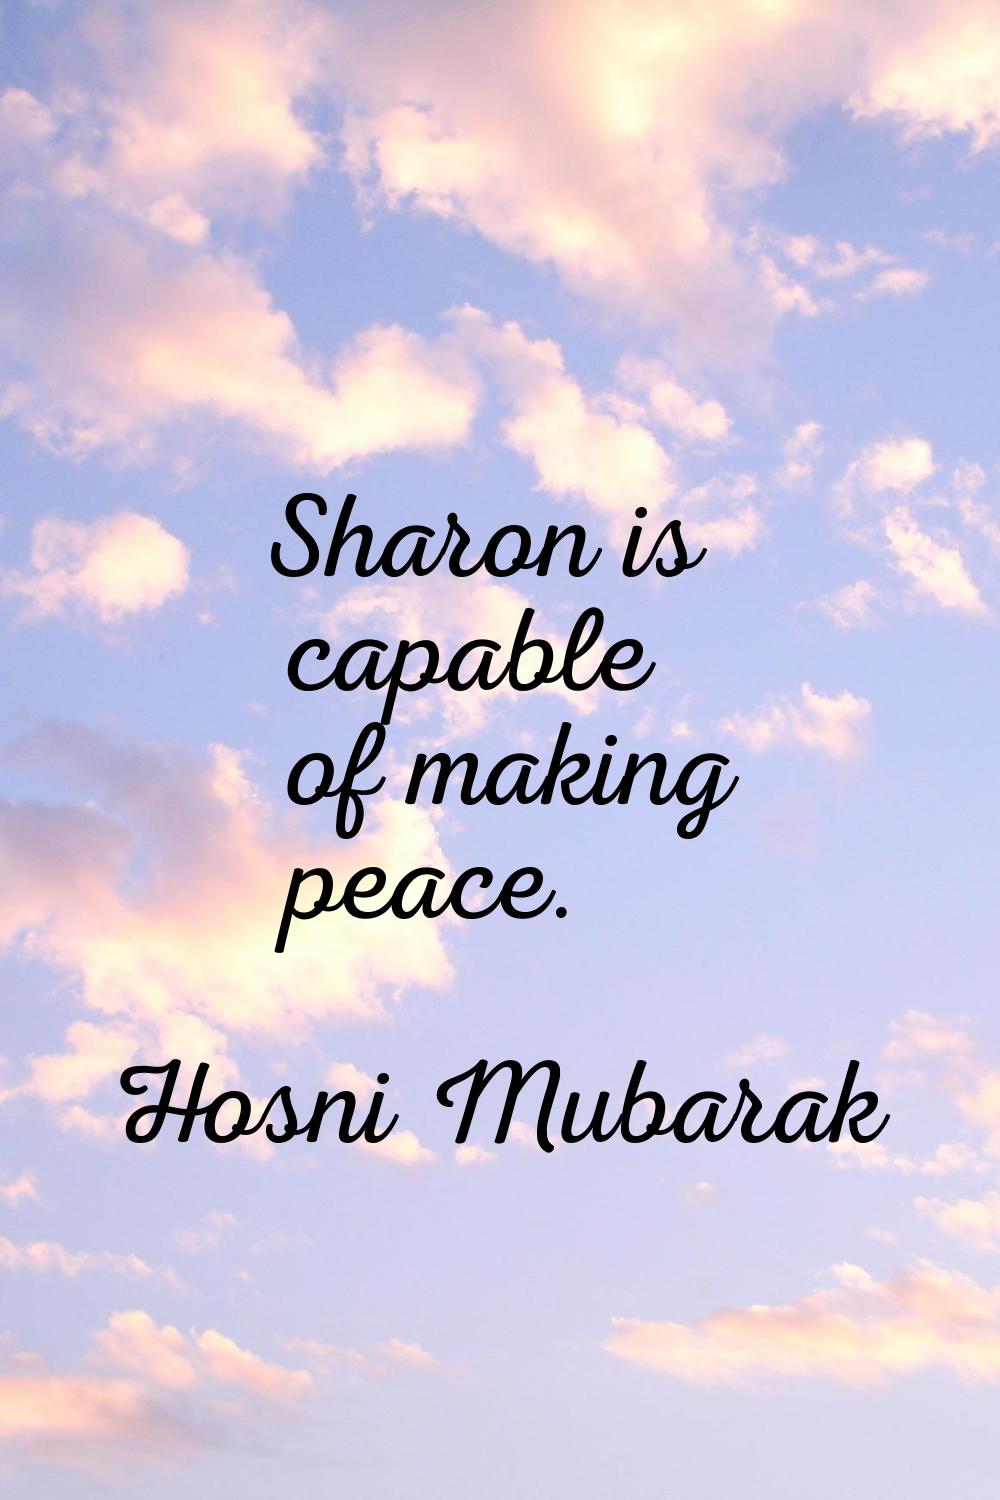 Sharon is capable of making peace.